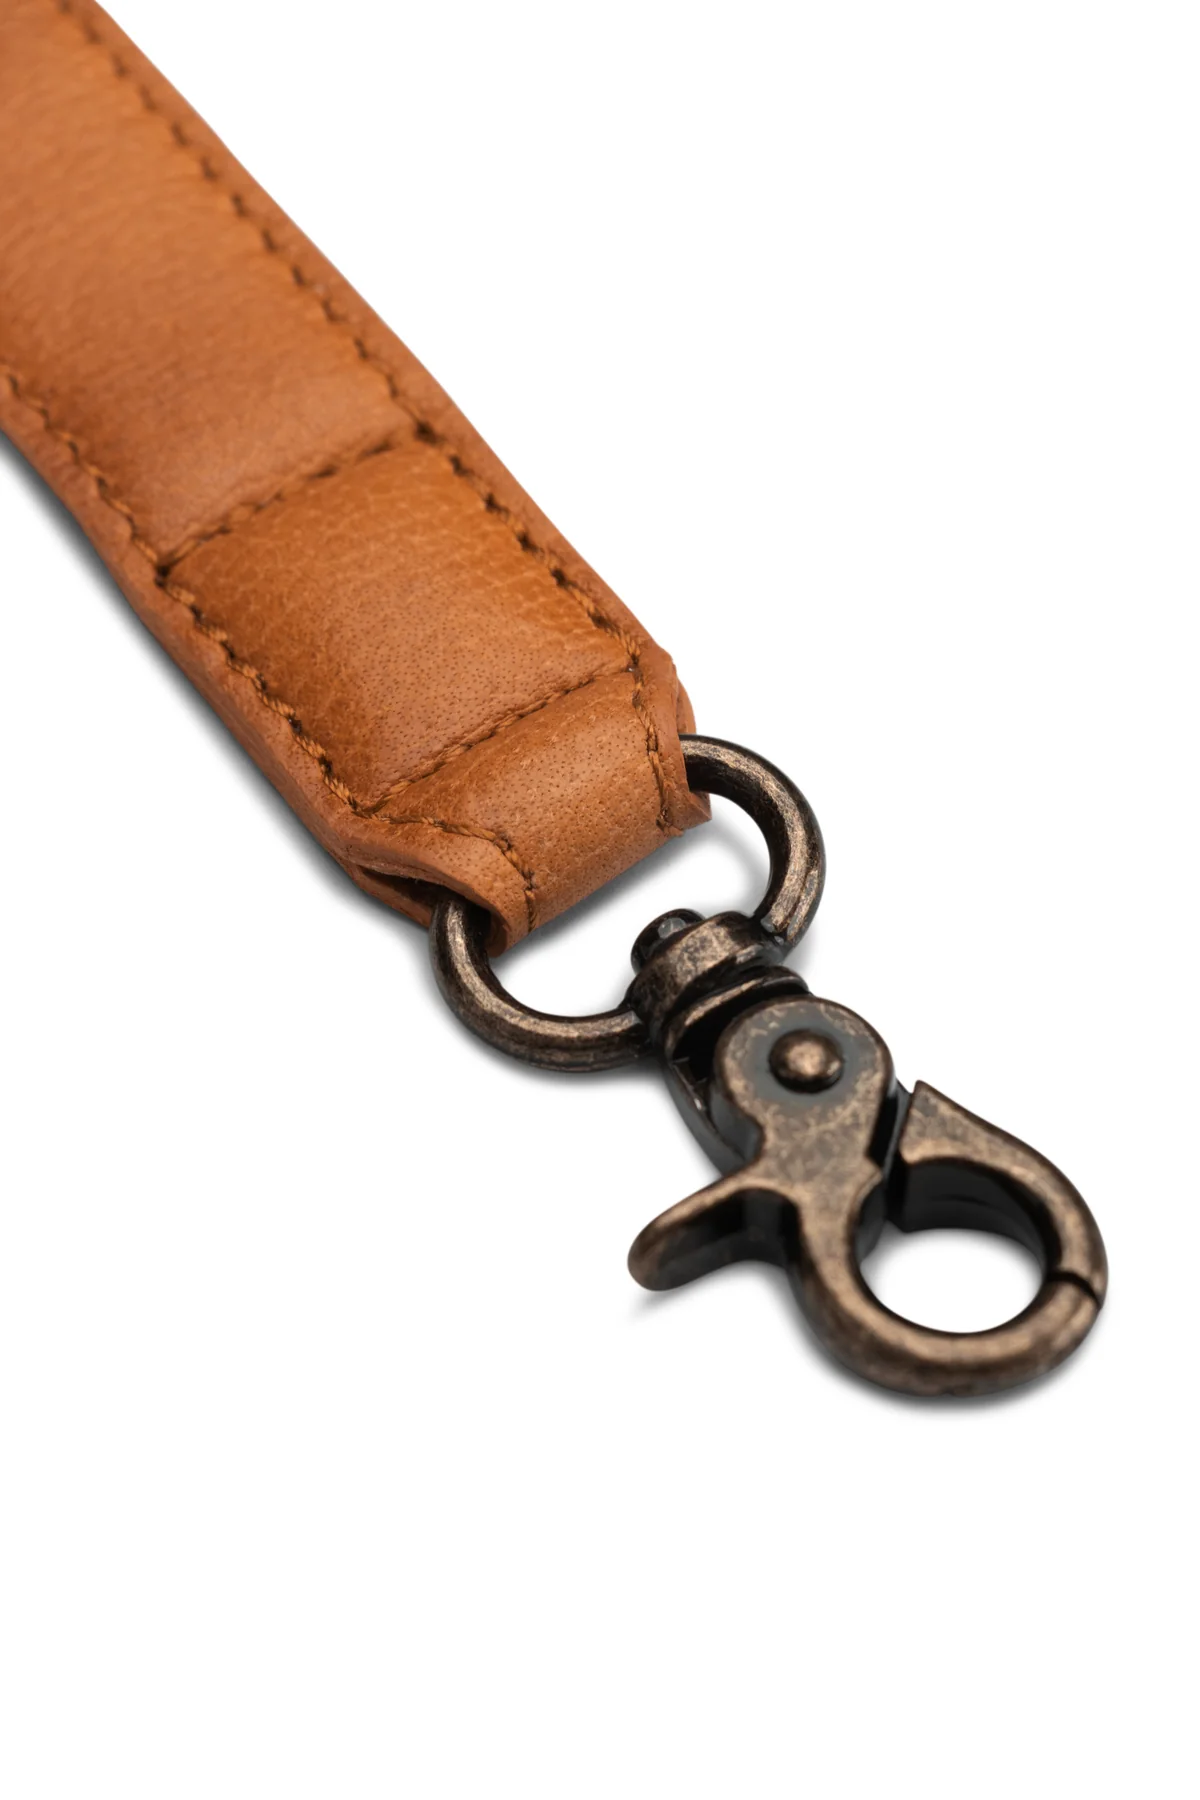 muud_Caia_shoulderstrap_whisky_detail_2